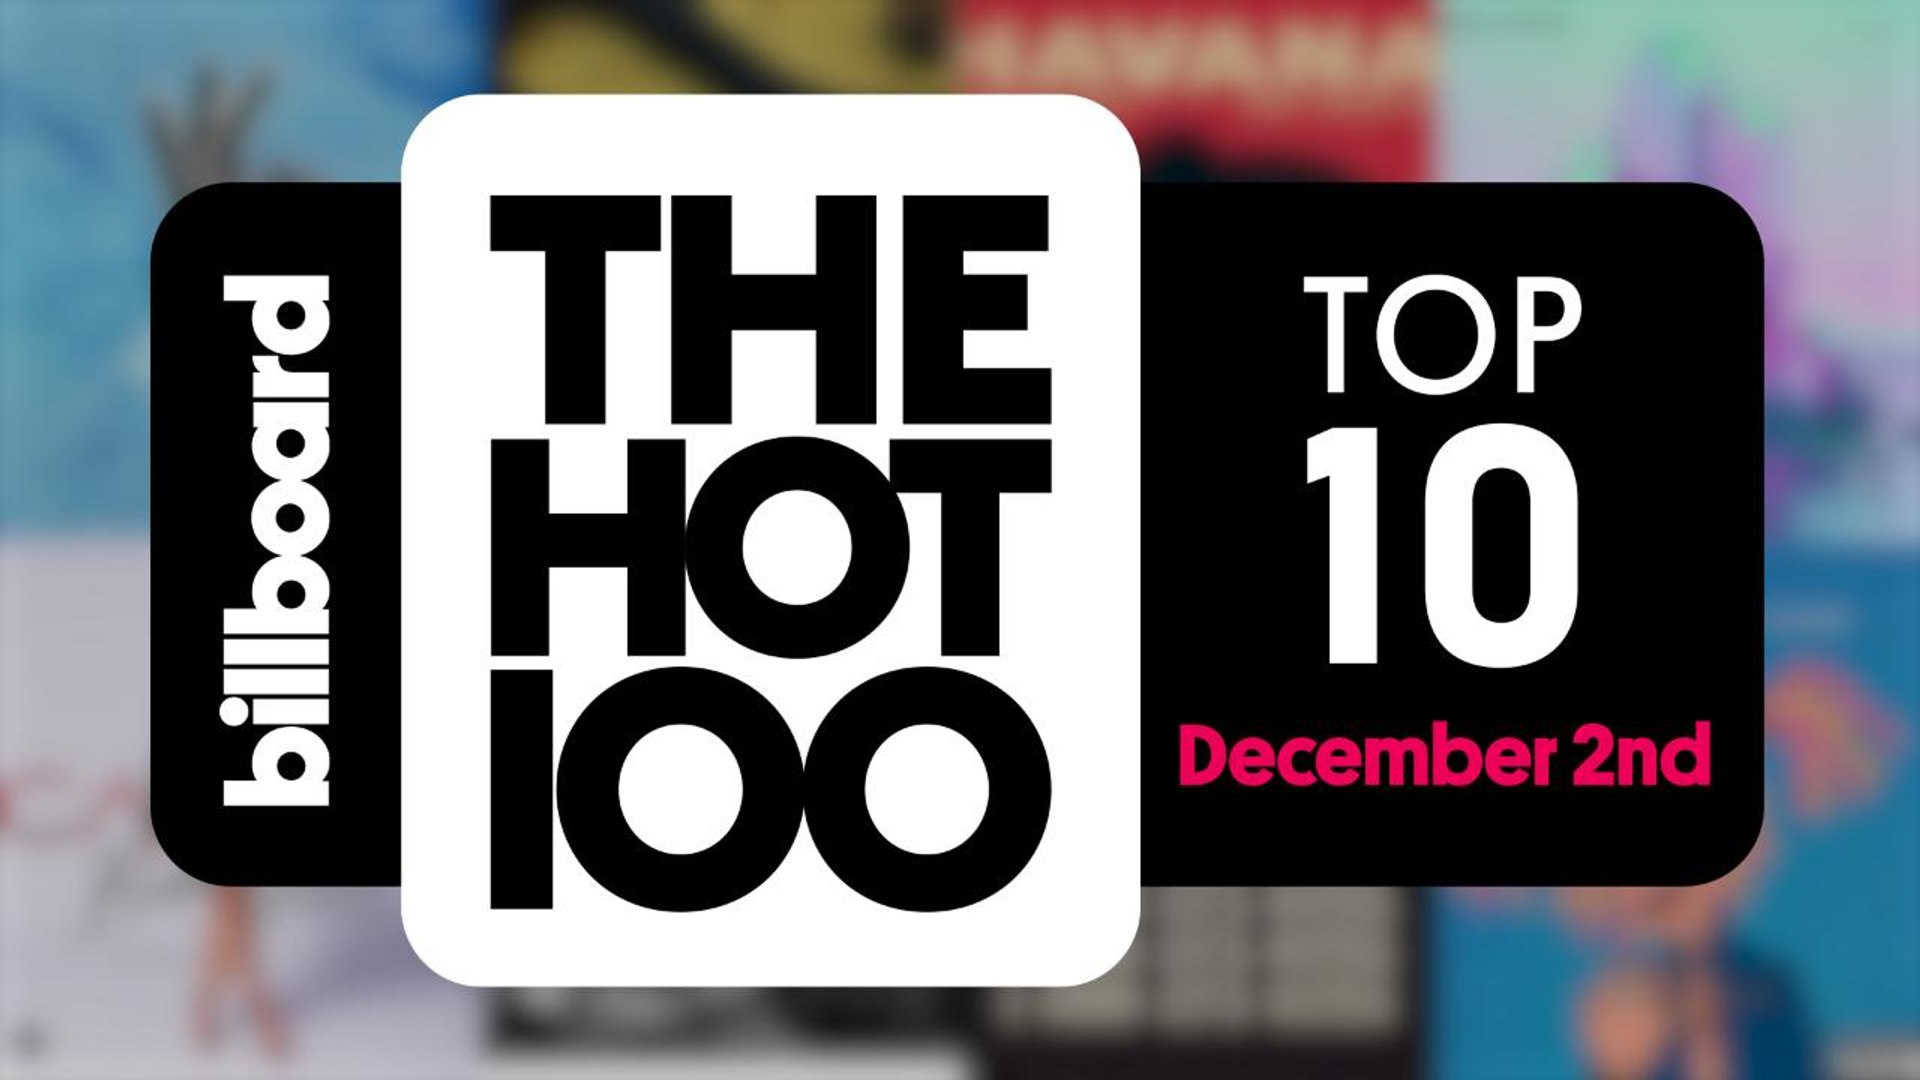 Early Release! Billboard Hot 100 Top 10 December 2nd 2017 Countdown | Official